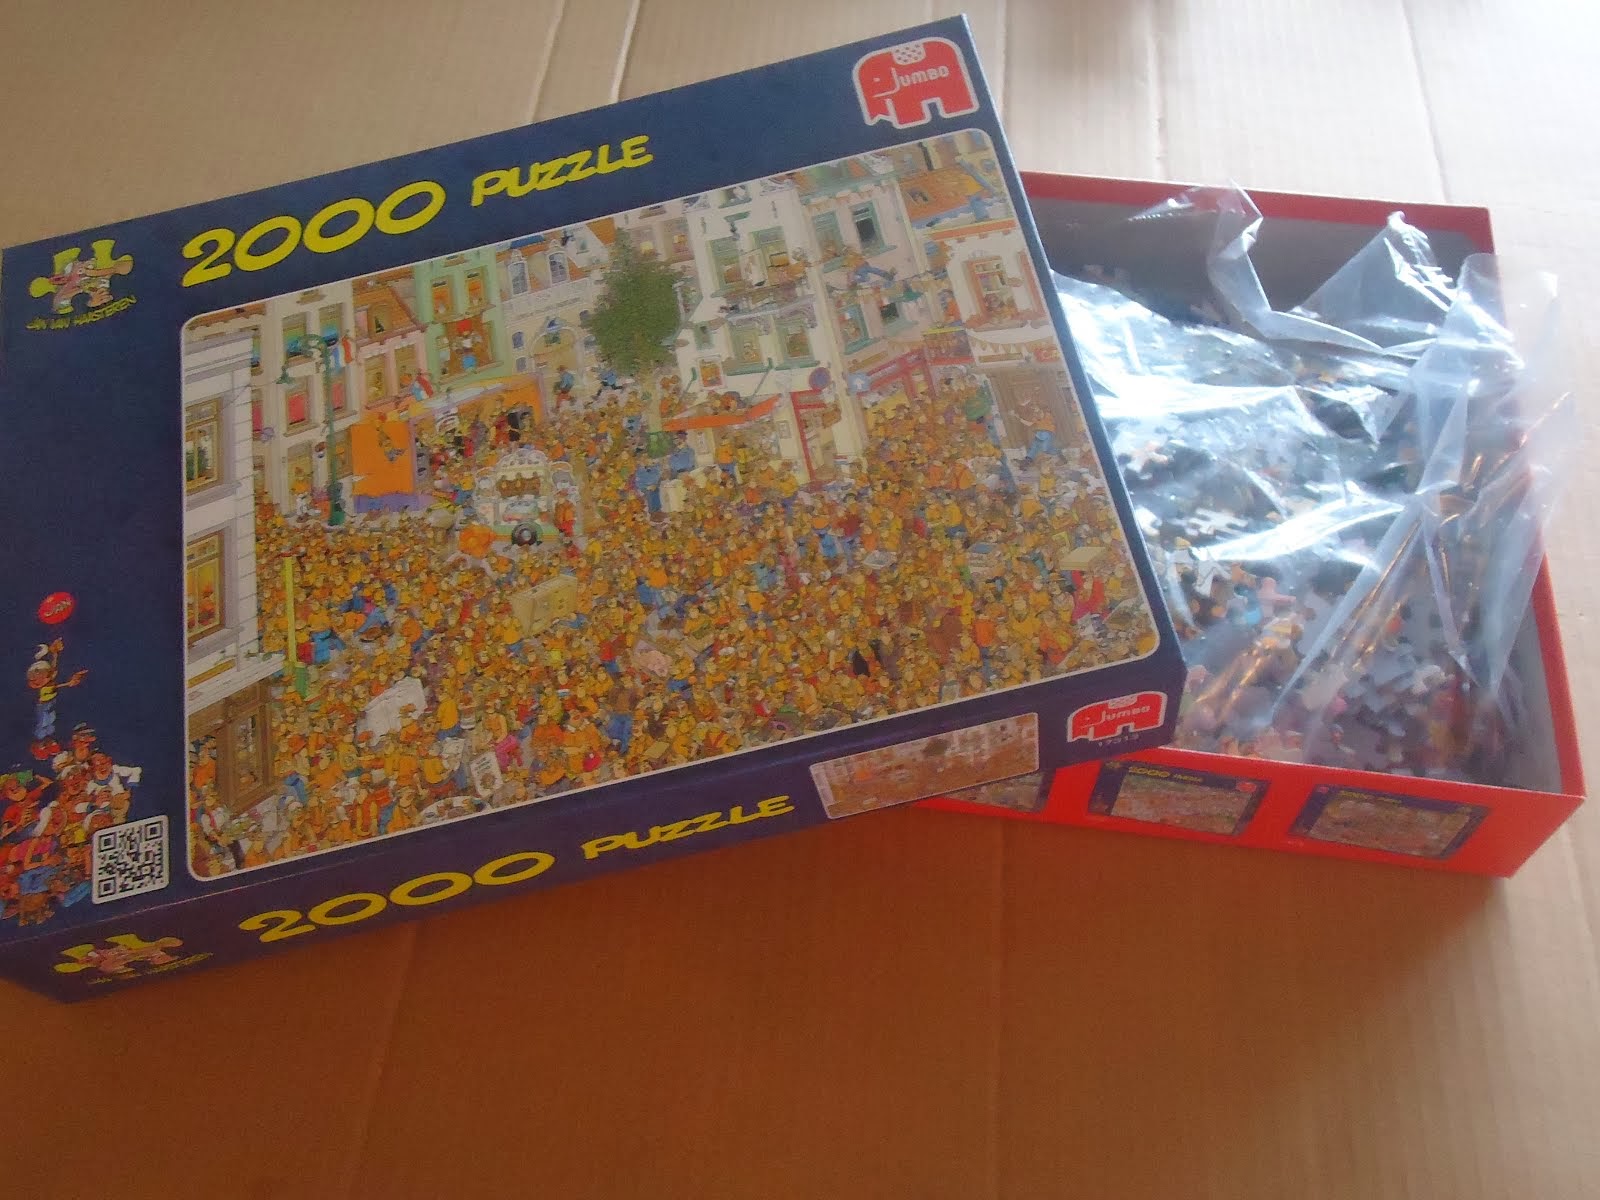 The Inauguration- 2000 piece jigsaw puzzle!